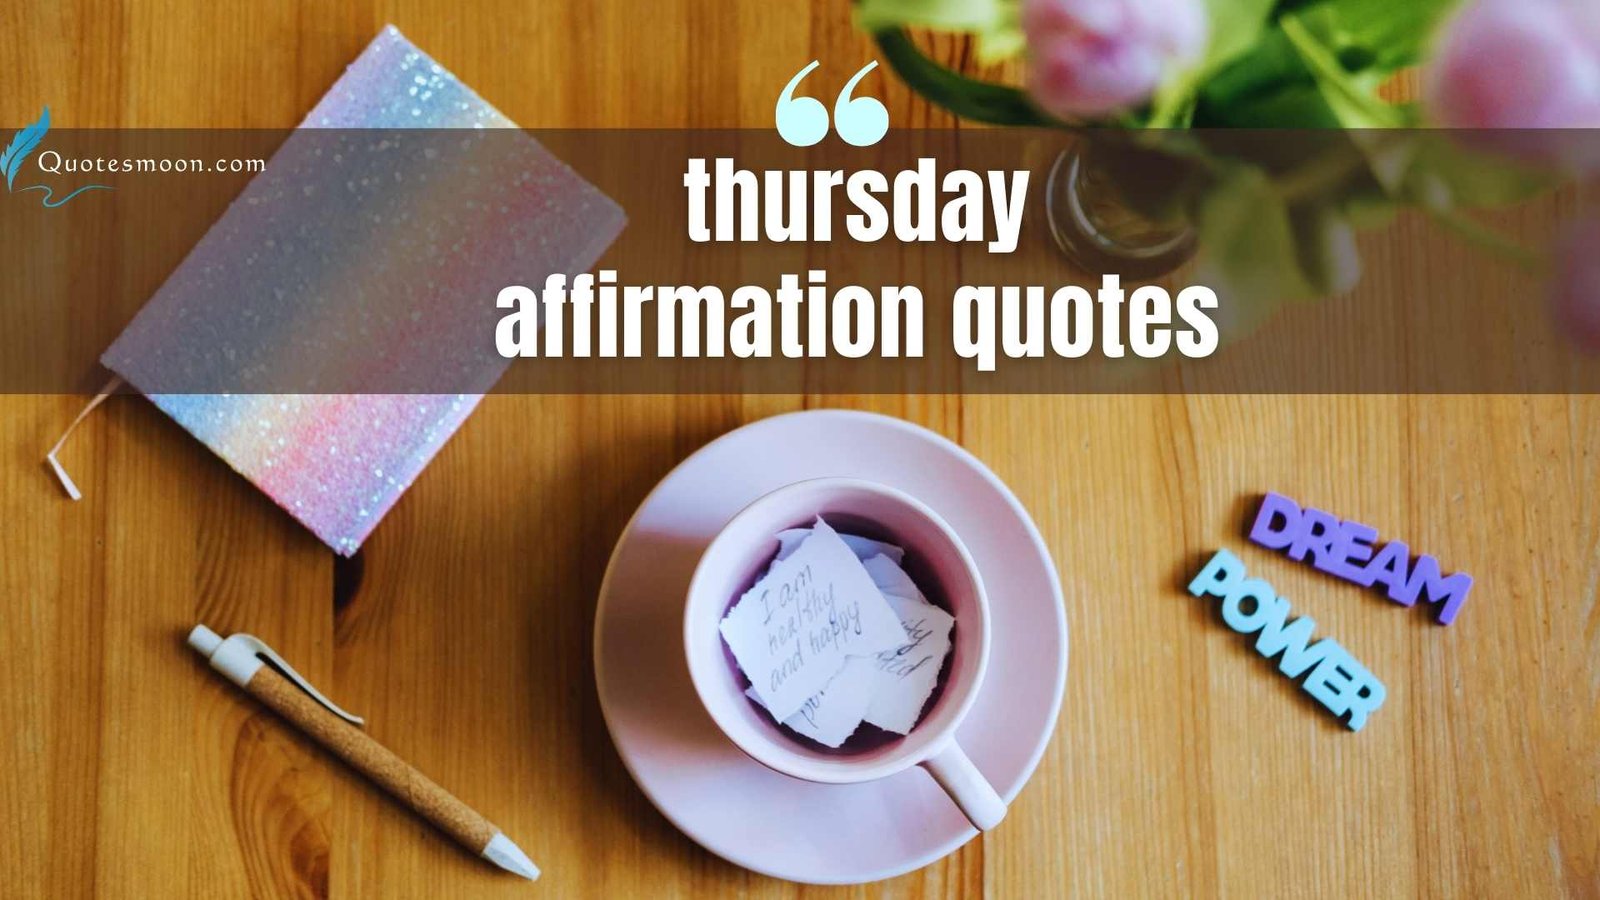 thursday affirmation quotes